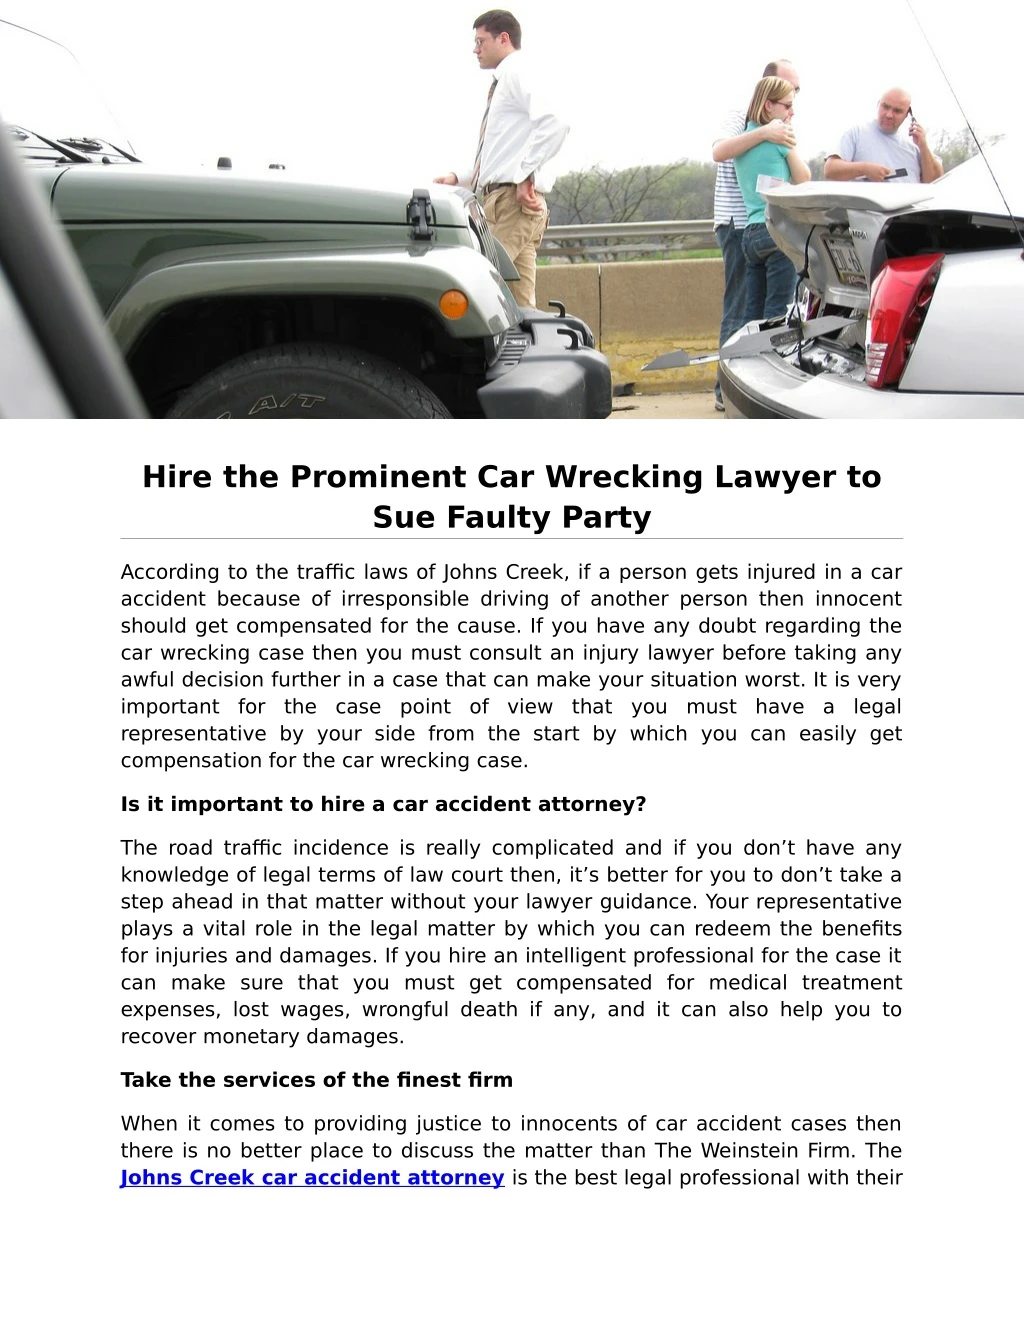 hire the prominent car wrecking lawyer